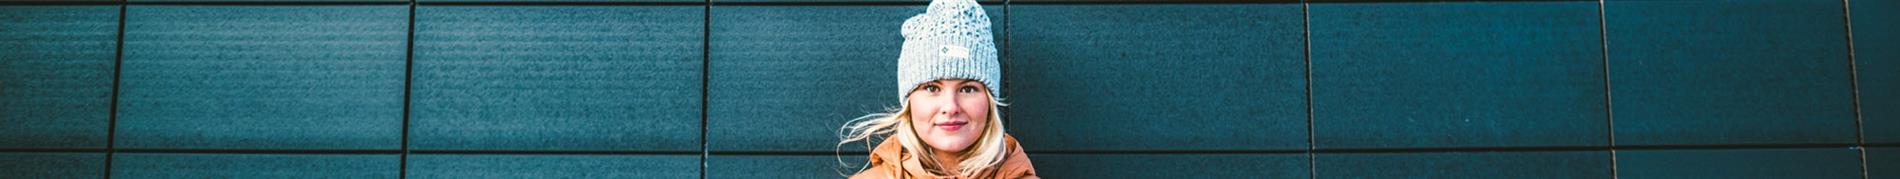 Smartwool Stylish Women's Ski and Snowboard Hats for Winter 